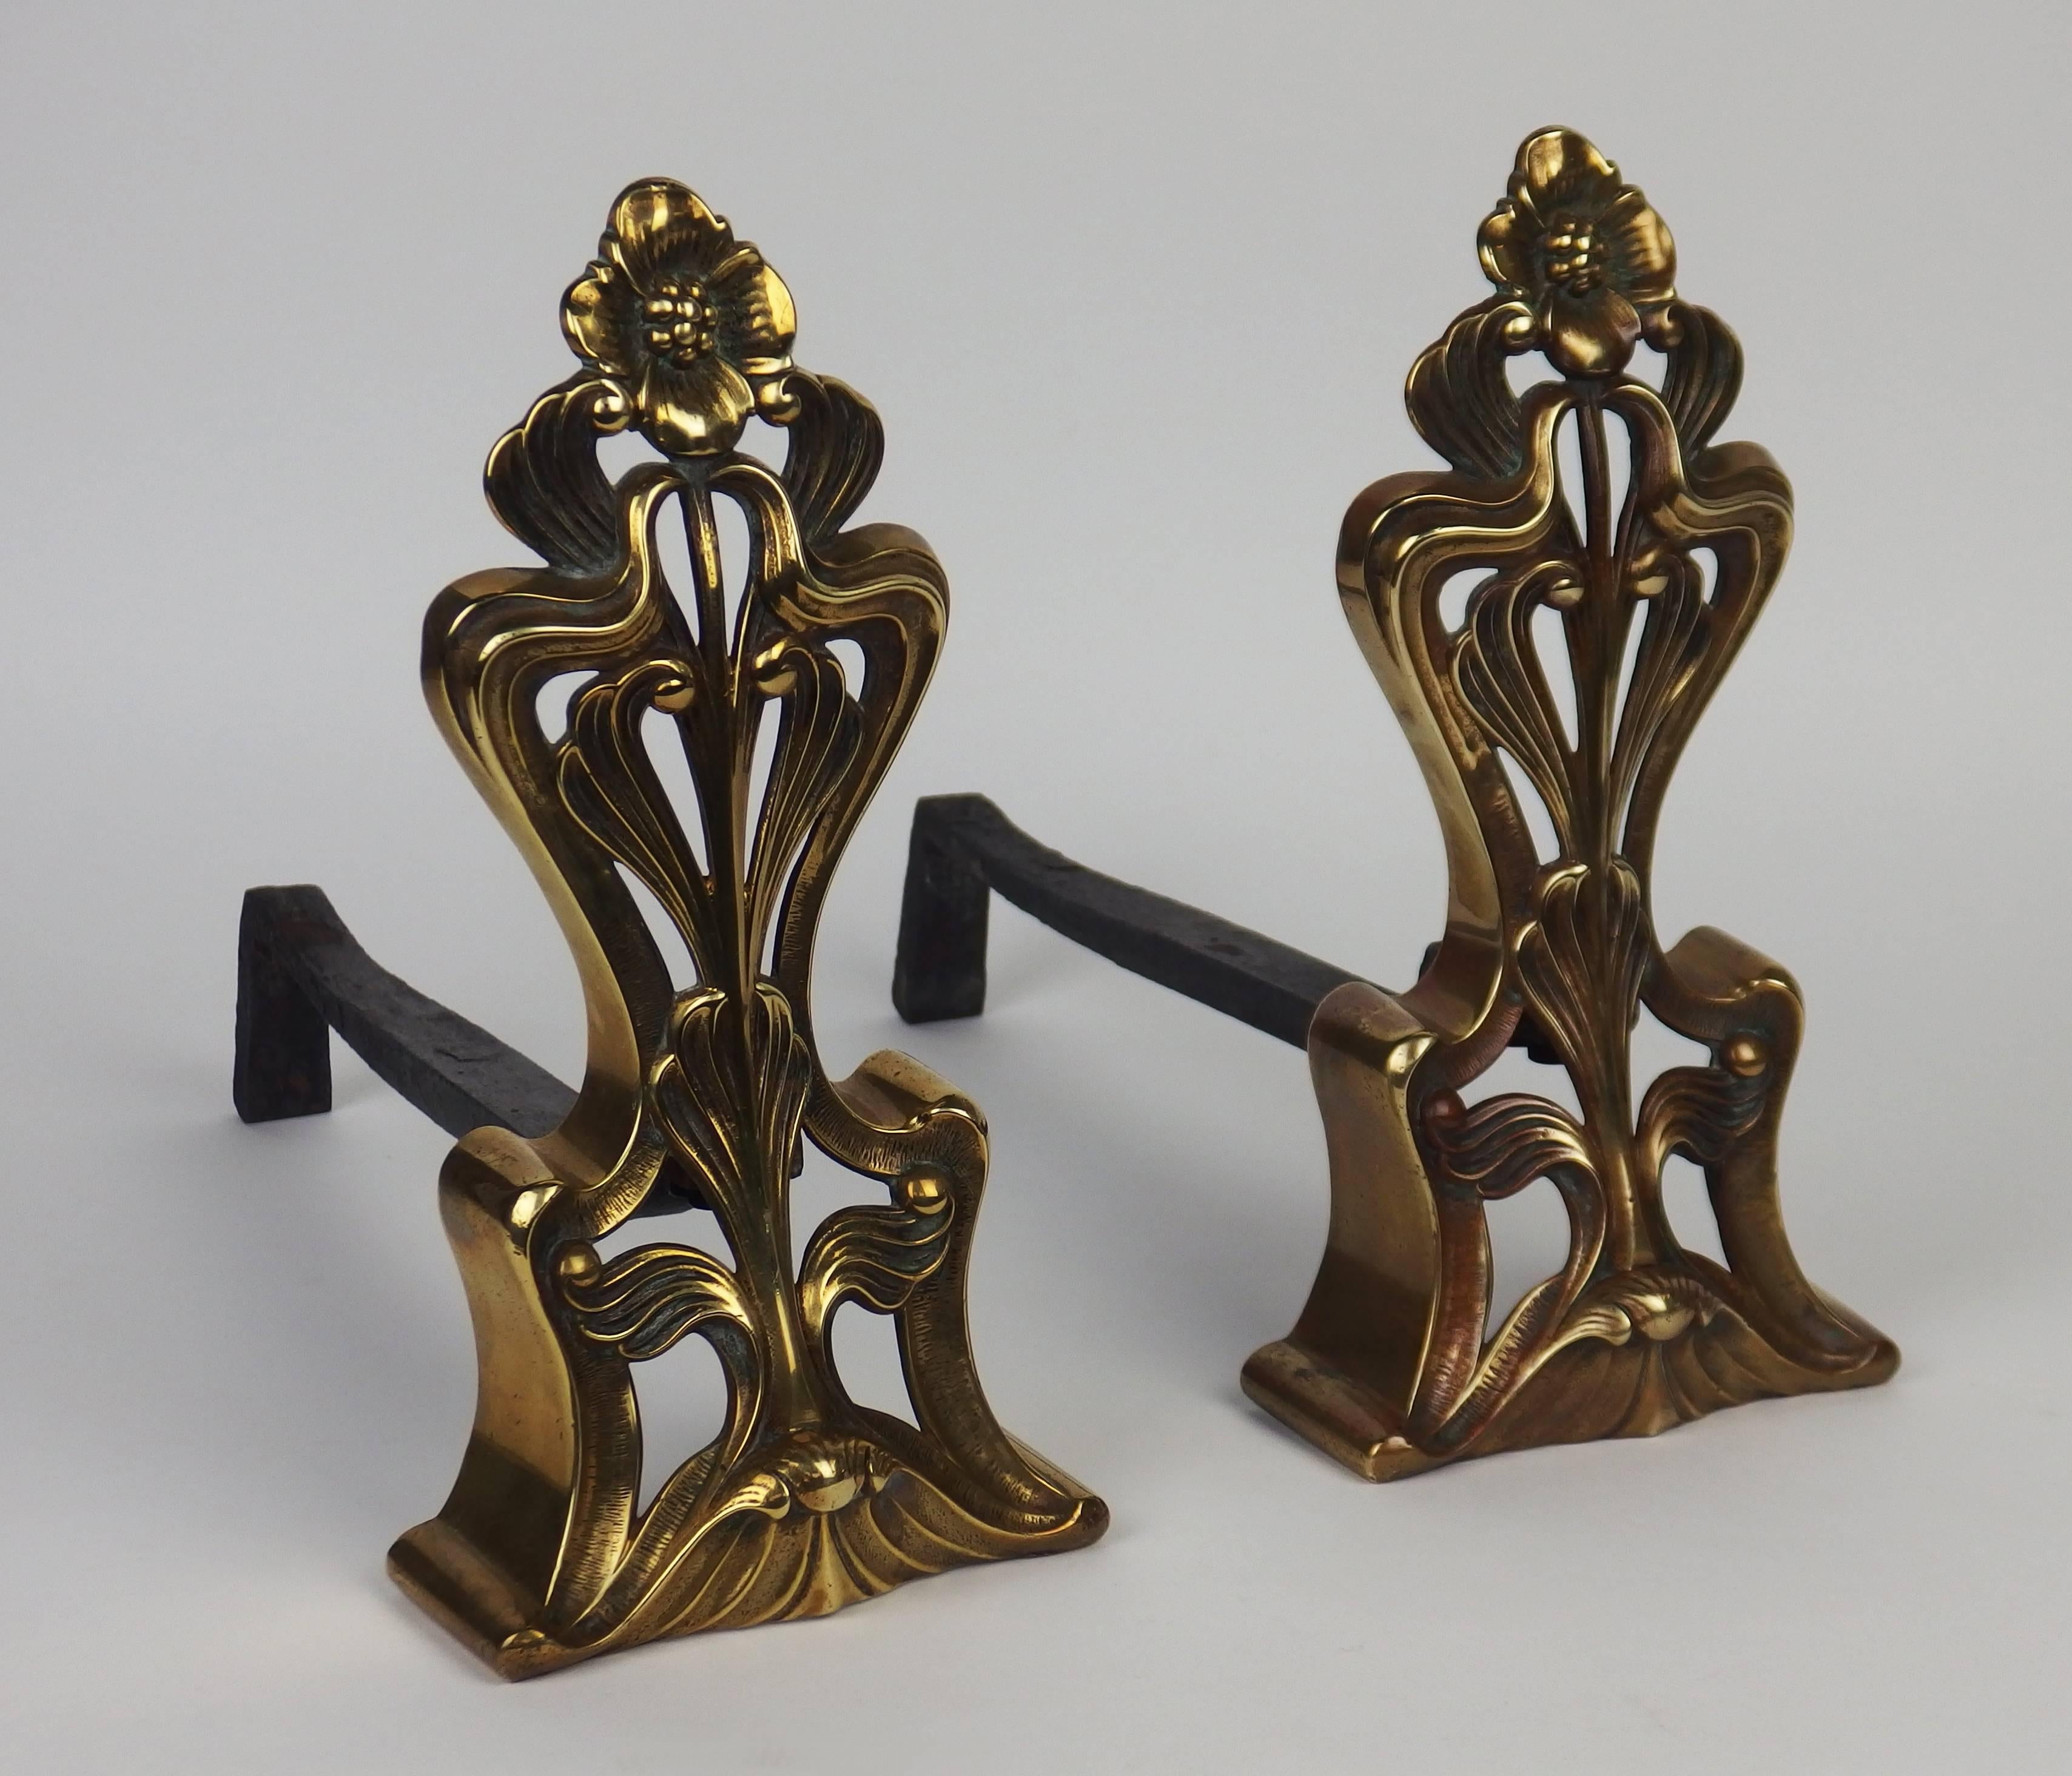 A pair of bronze andirons with typical Art Nouveau wavy lines and flowers.